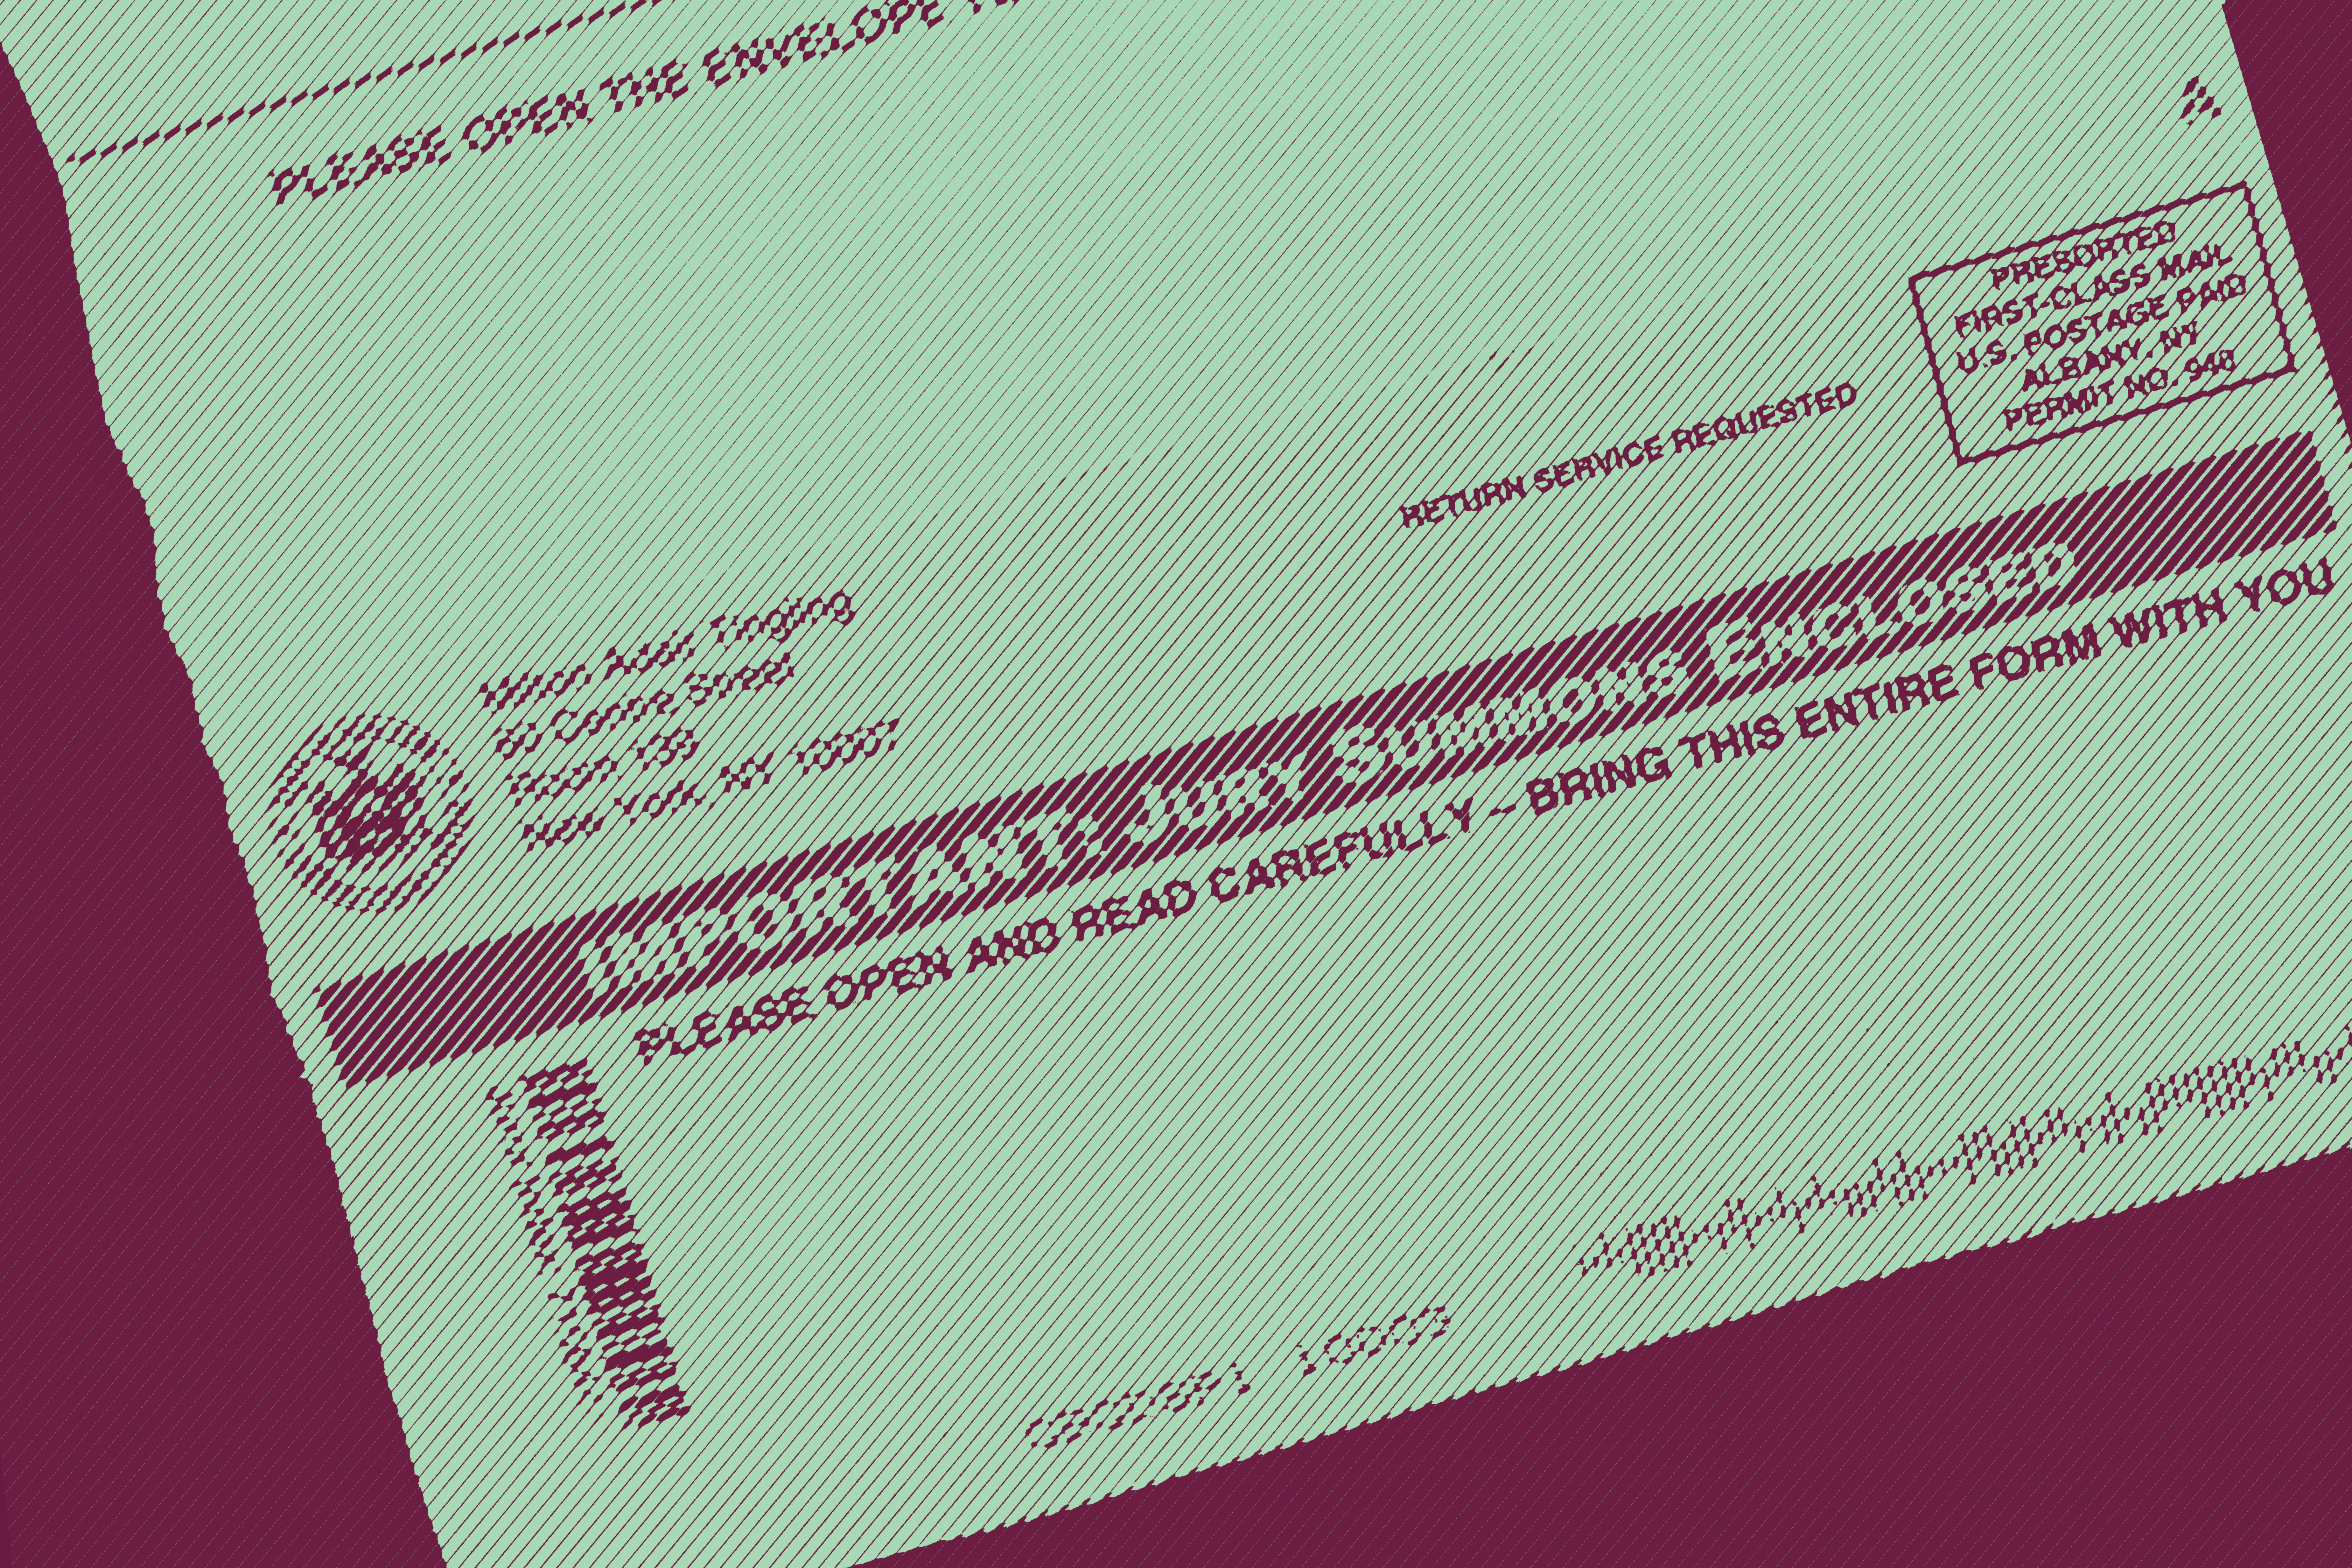 Photograph of a jury duty summons letter